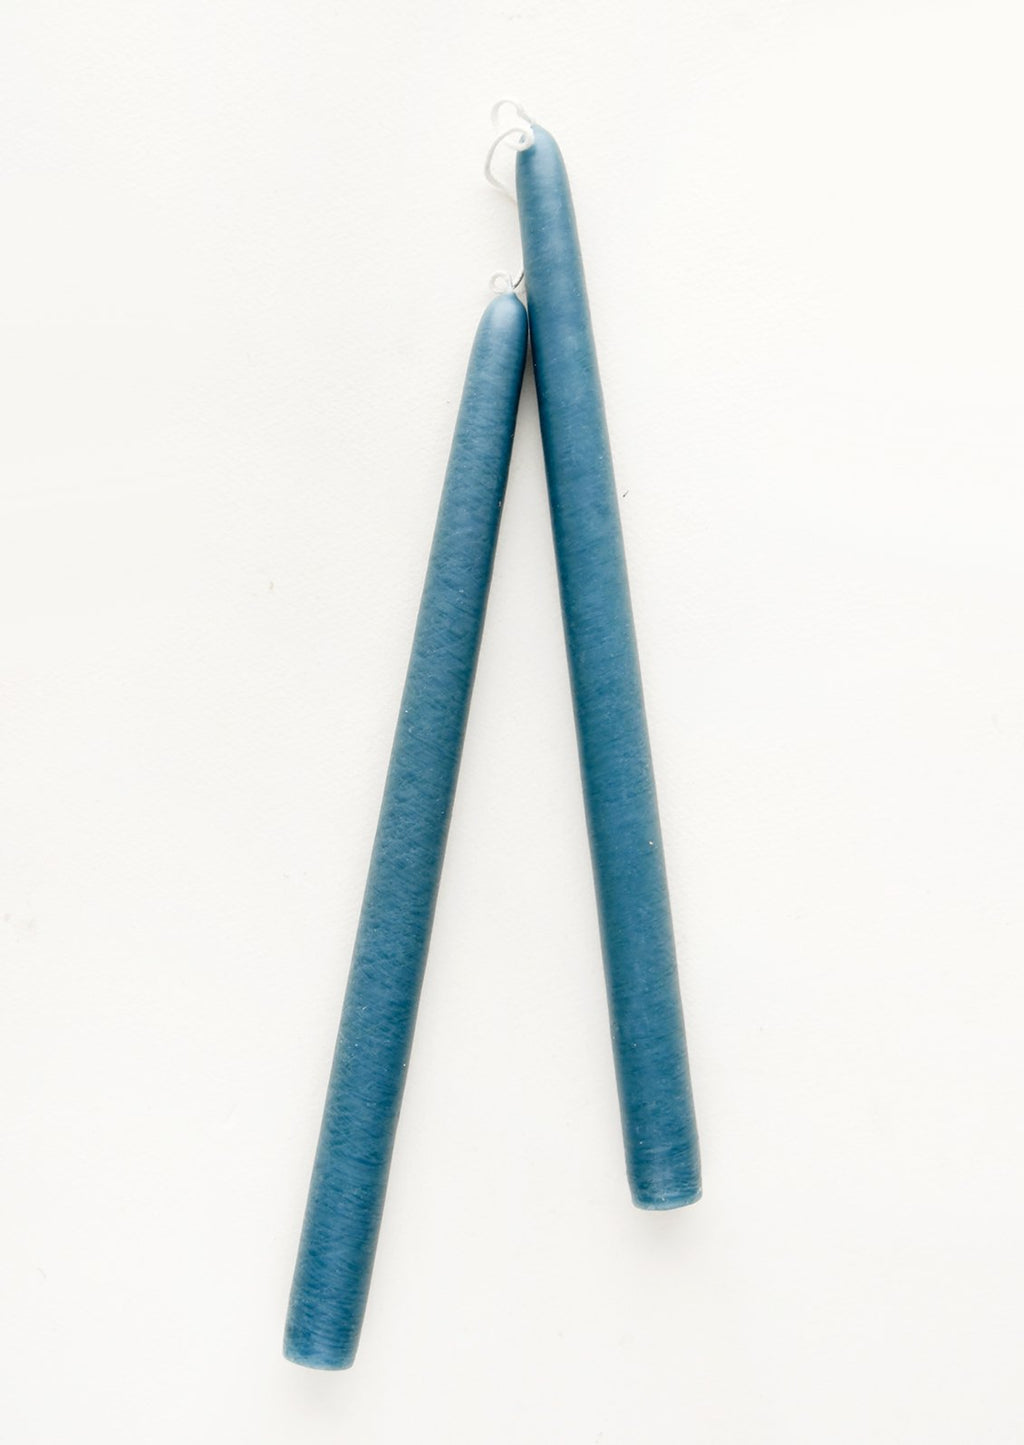 Lake Blue: Dripless Taper Candles